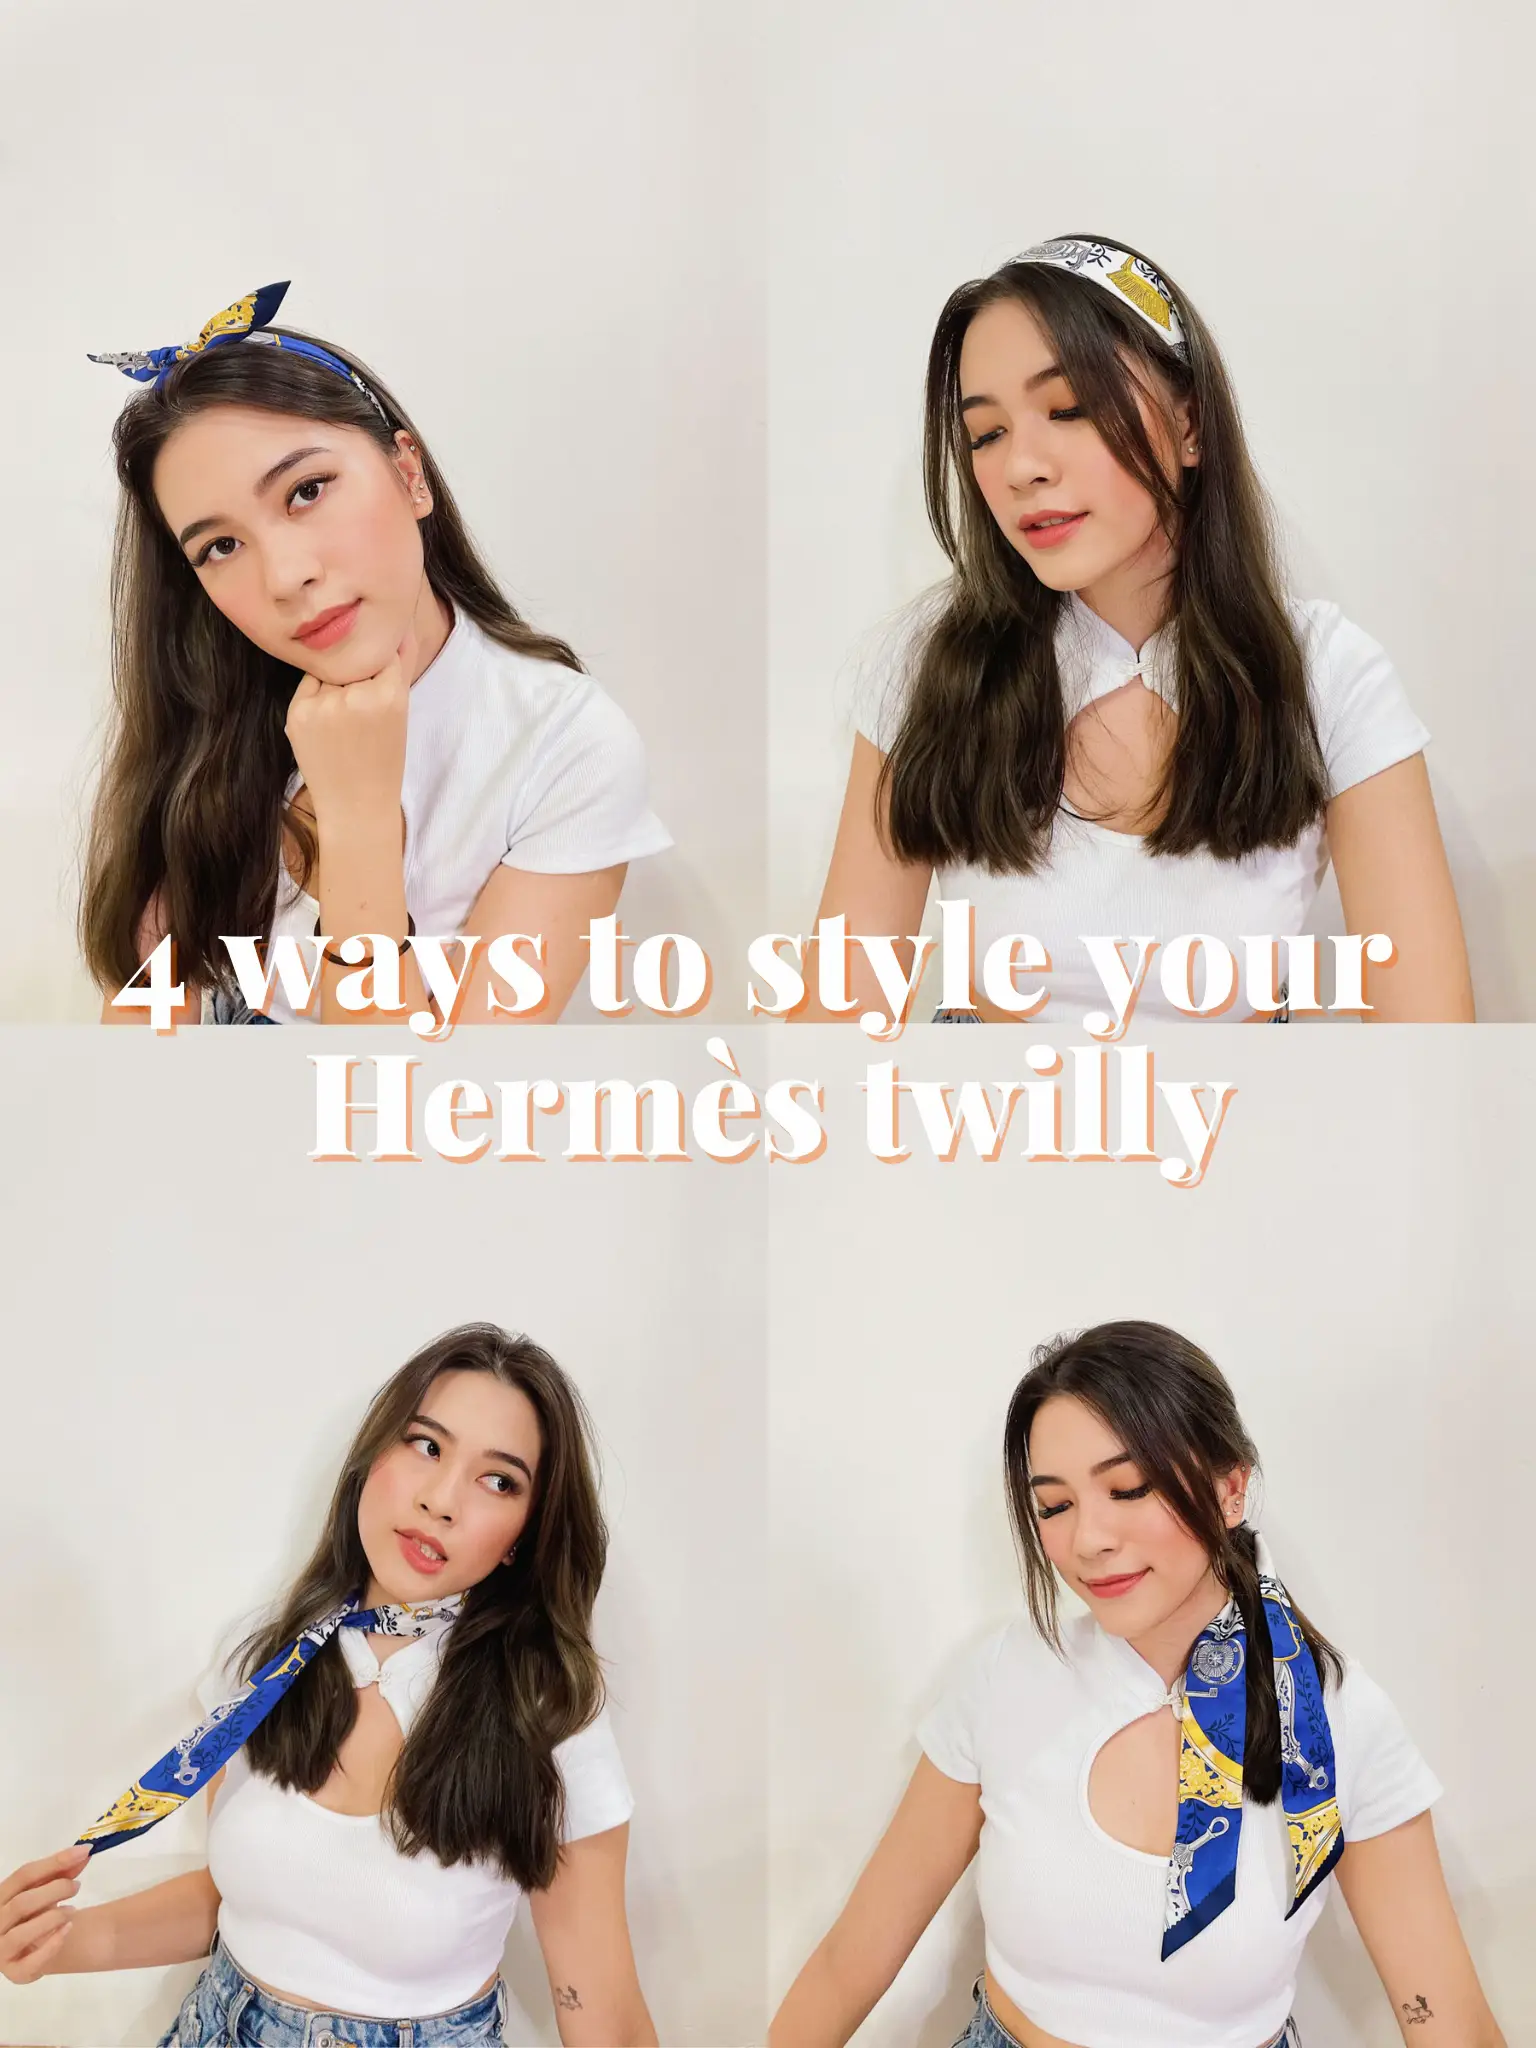 My Hermes Twilly Collection  How to accessorize Hermes handbags